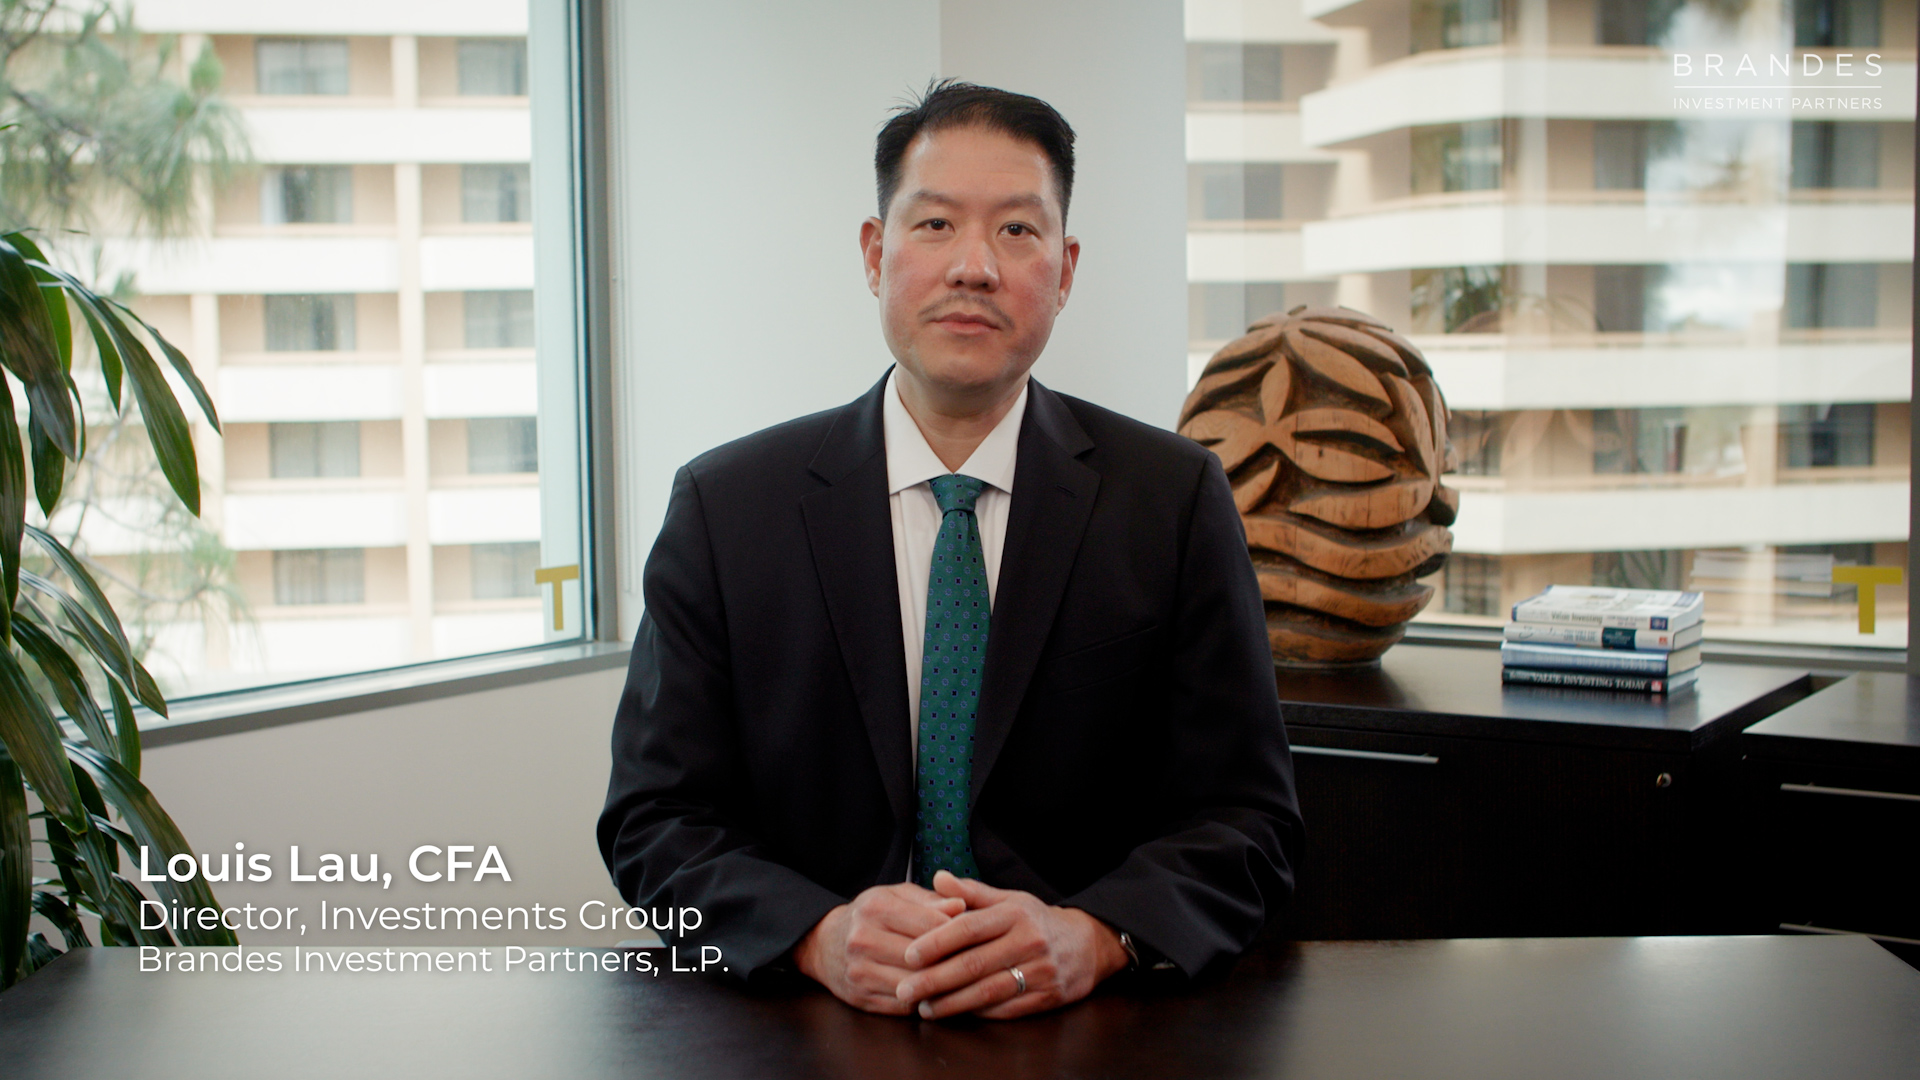 Louis Lau, CFA - Value Investing in Today’s Environment